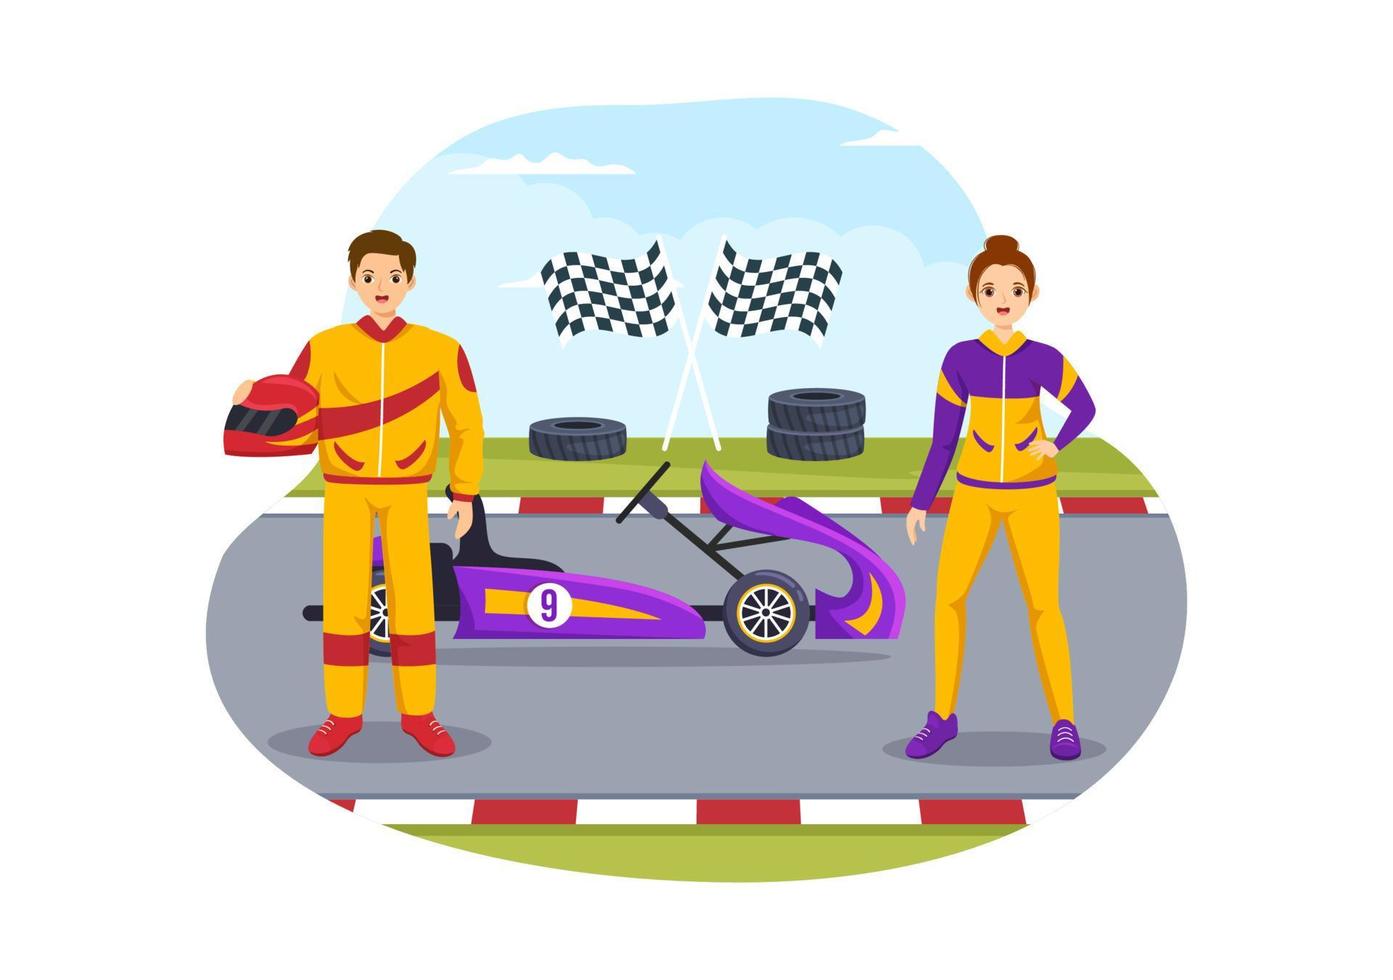 Karting Sport with Racing Game Go Kart or Mini Car on Small Circuit Track in Flat Cartoon Hand Drawn Template Illustration vector